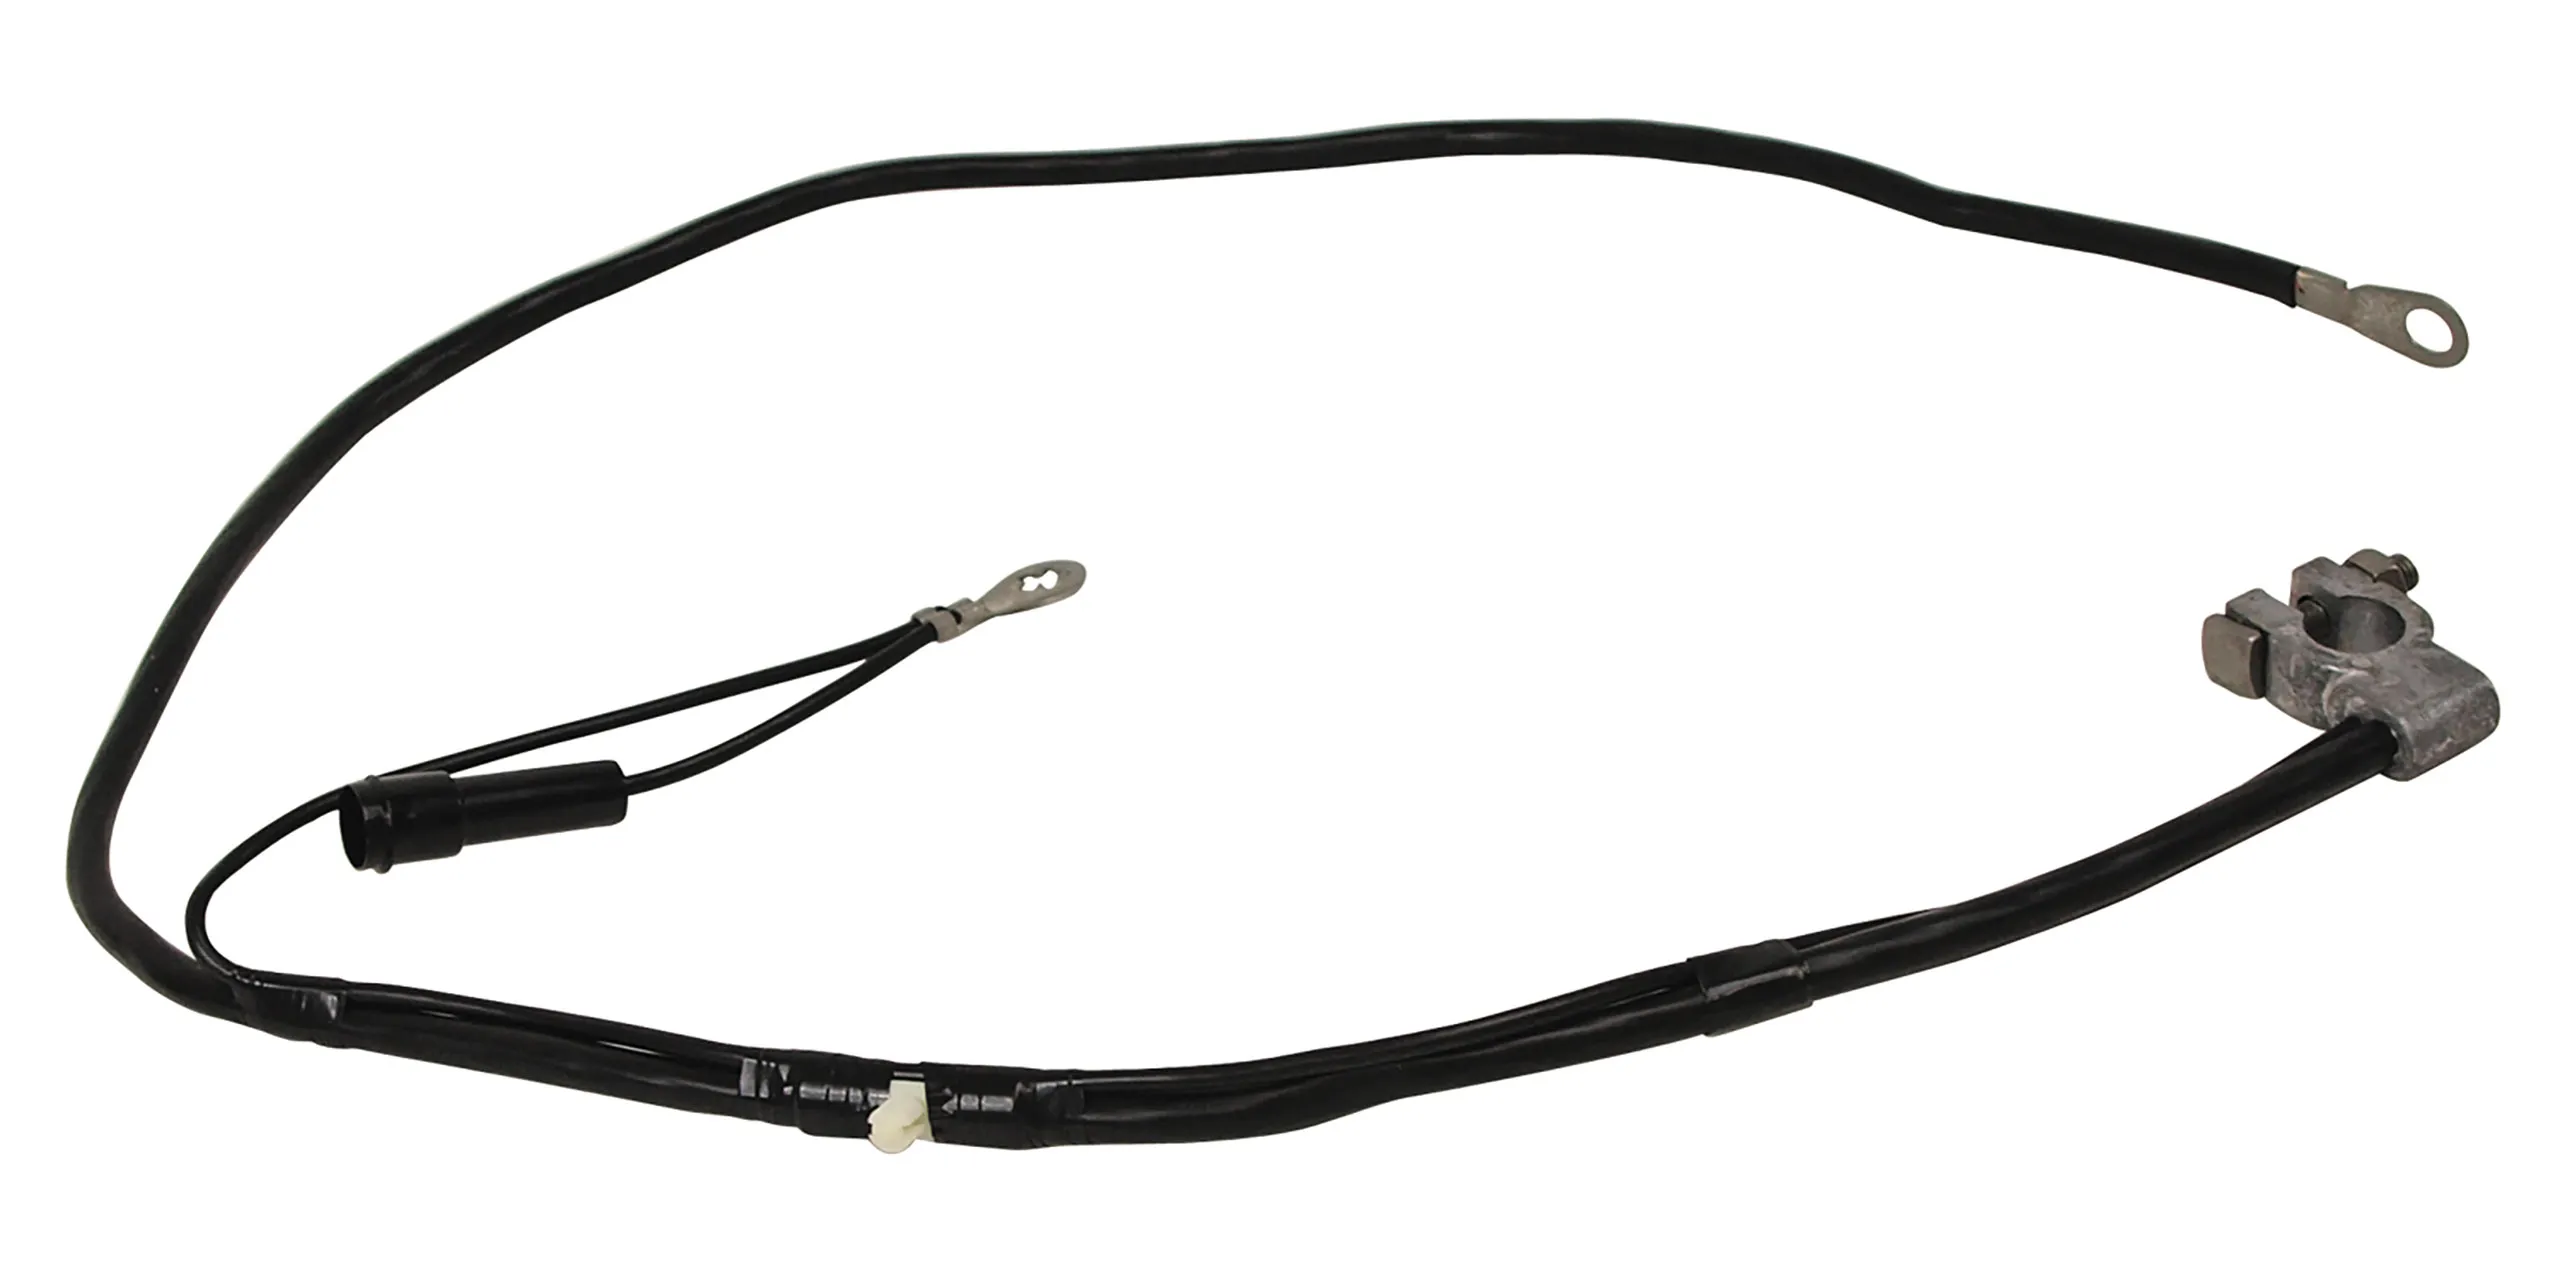 Third Generation 1987-1993 Ford Mustang Battery Cable - Negative - Daniel Carpenter